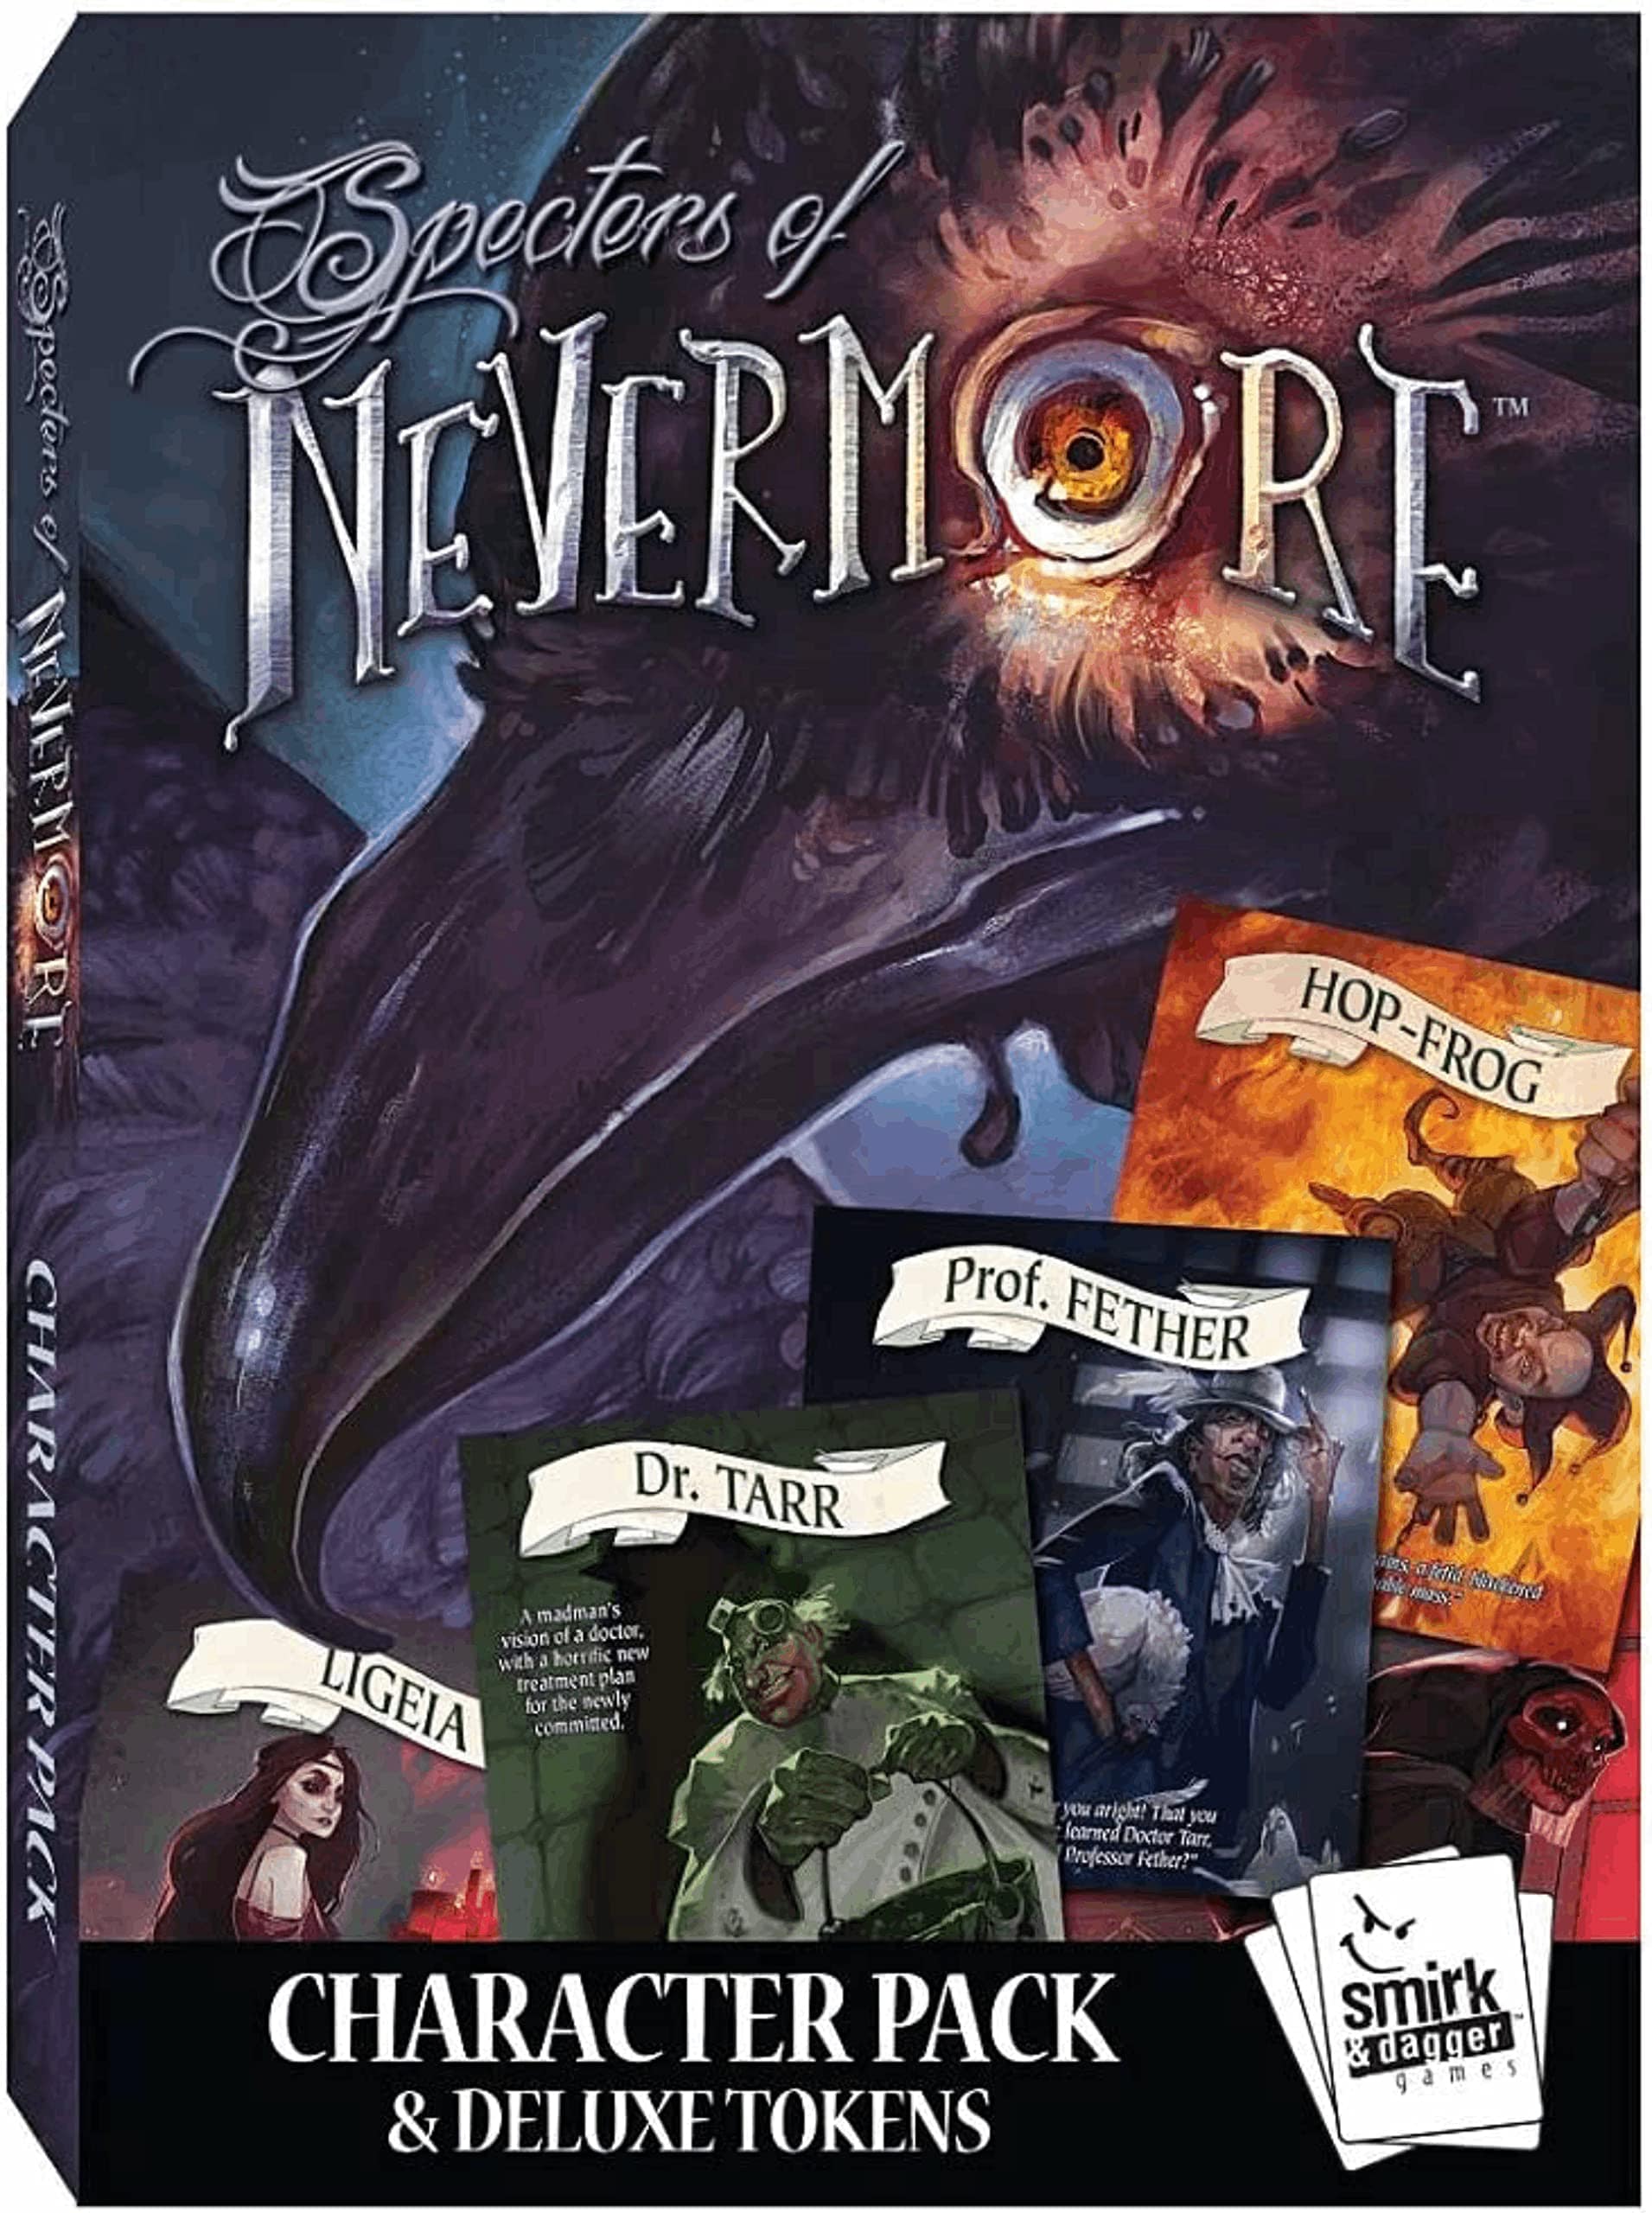 Smirk And Dagger Non-Collectible Card Smirk And Dagger Nevermore: Specters of Nevermore Expansion